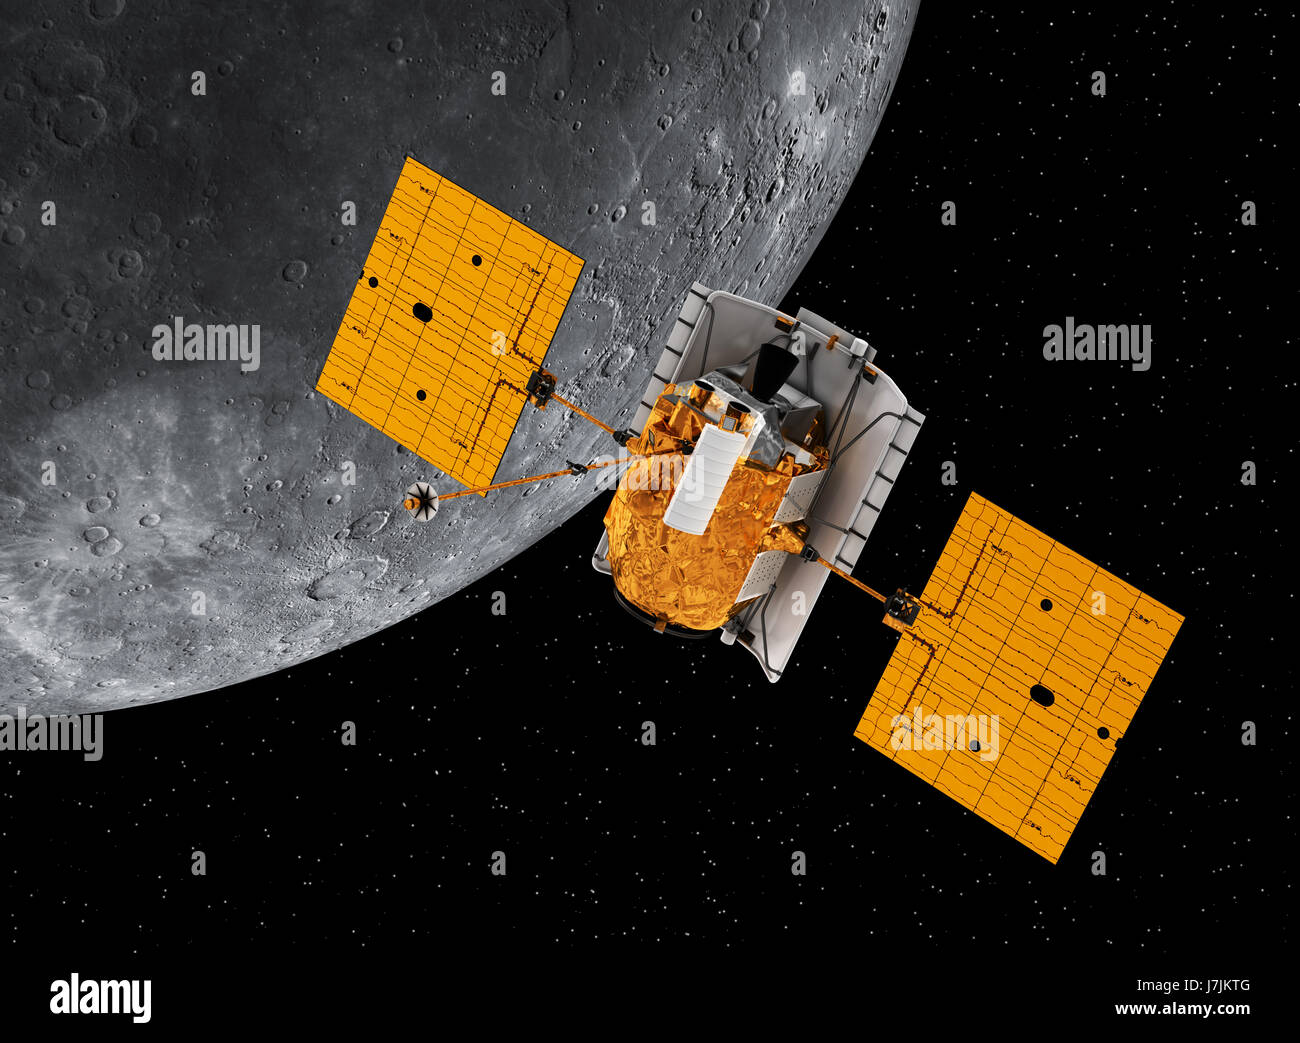 Interplanetary Space Station Orbiting Planet Mercury. 3D Illustration. Elements of this image furnished by NASA. Stock Photo